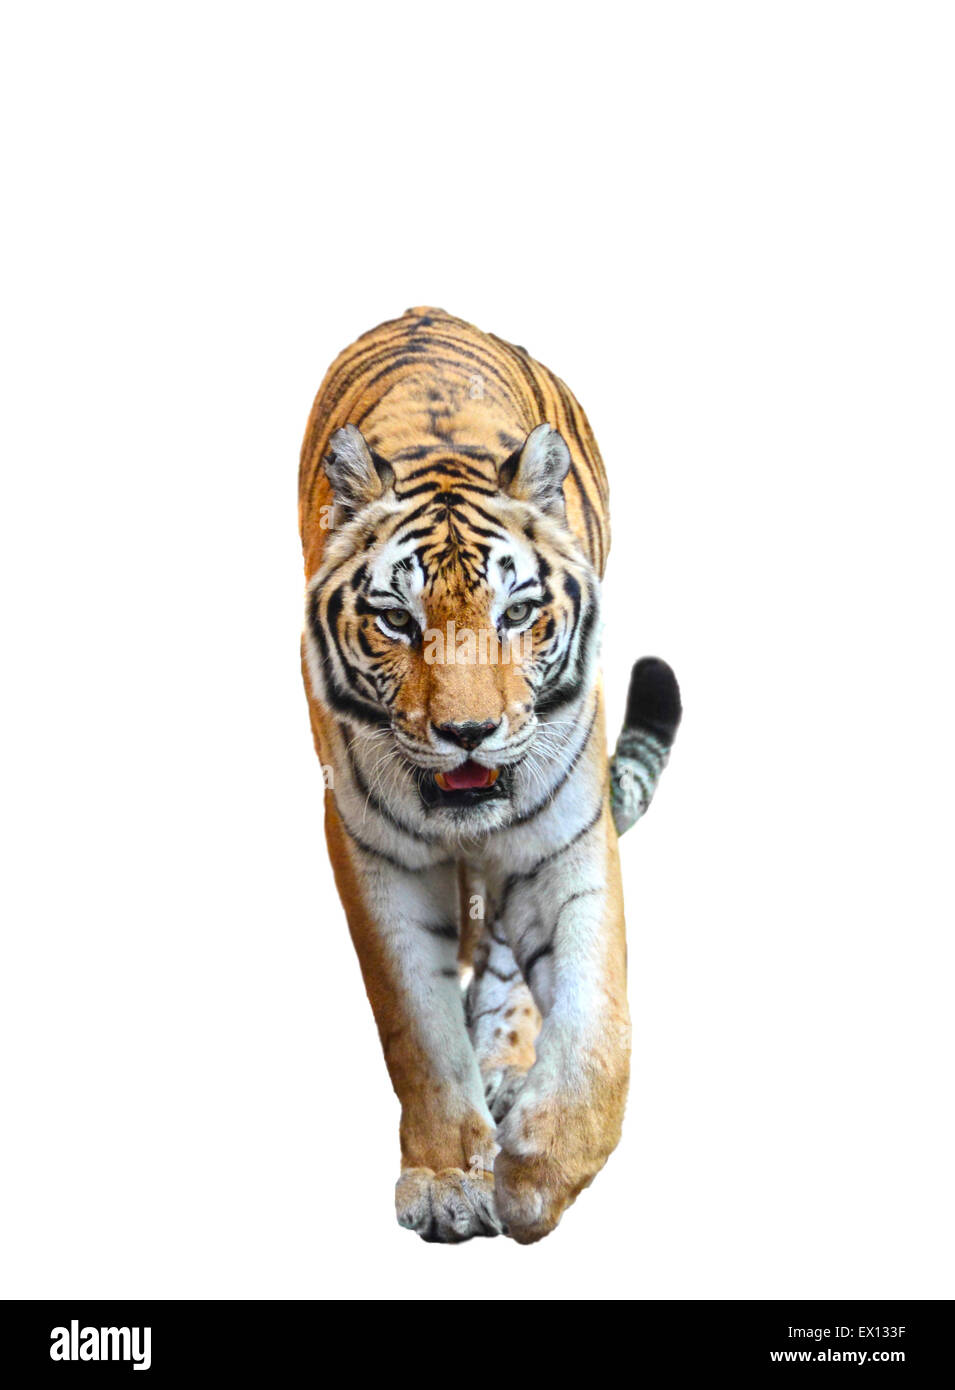 Tiger walking isolated on a white background Stock Photo - Alamy